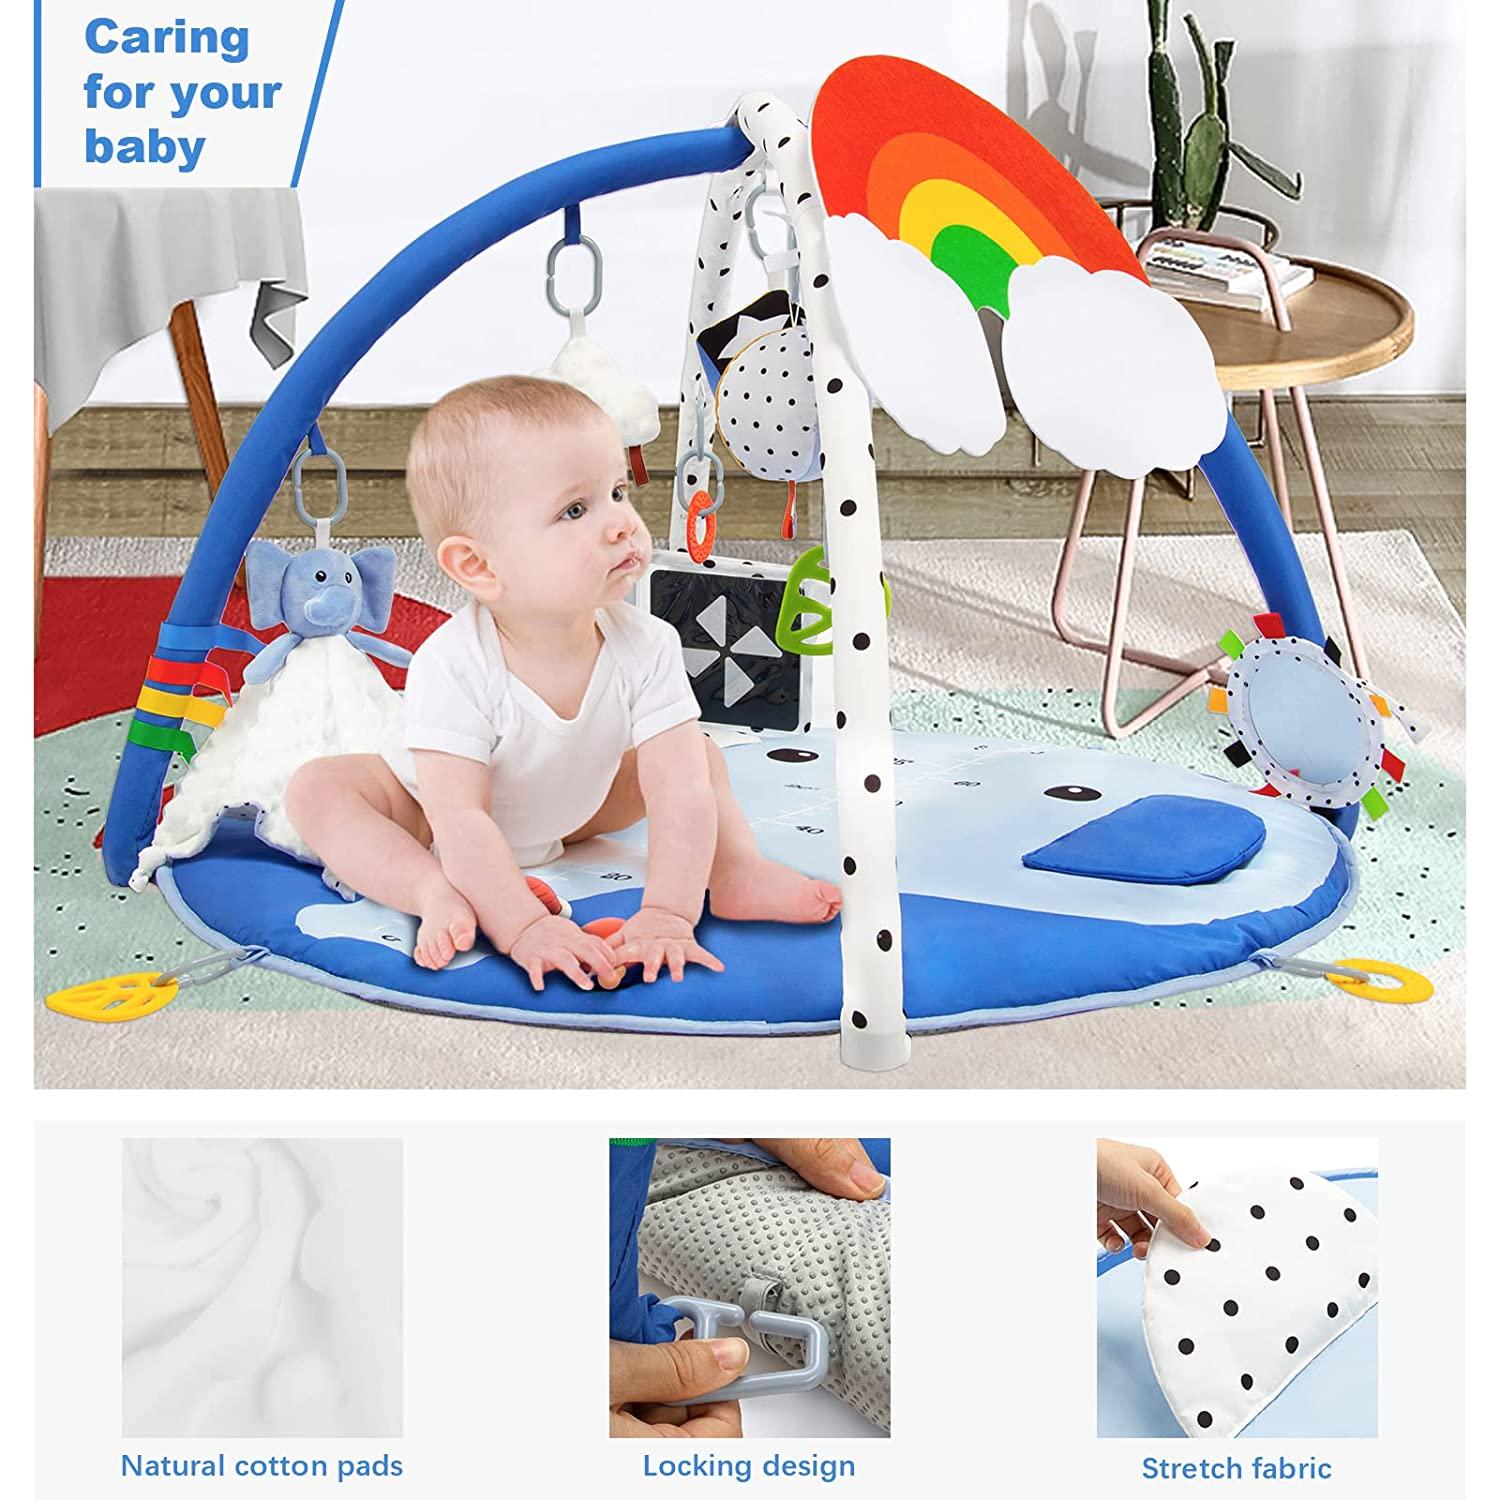 Does your baby need a play gym?